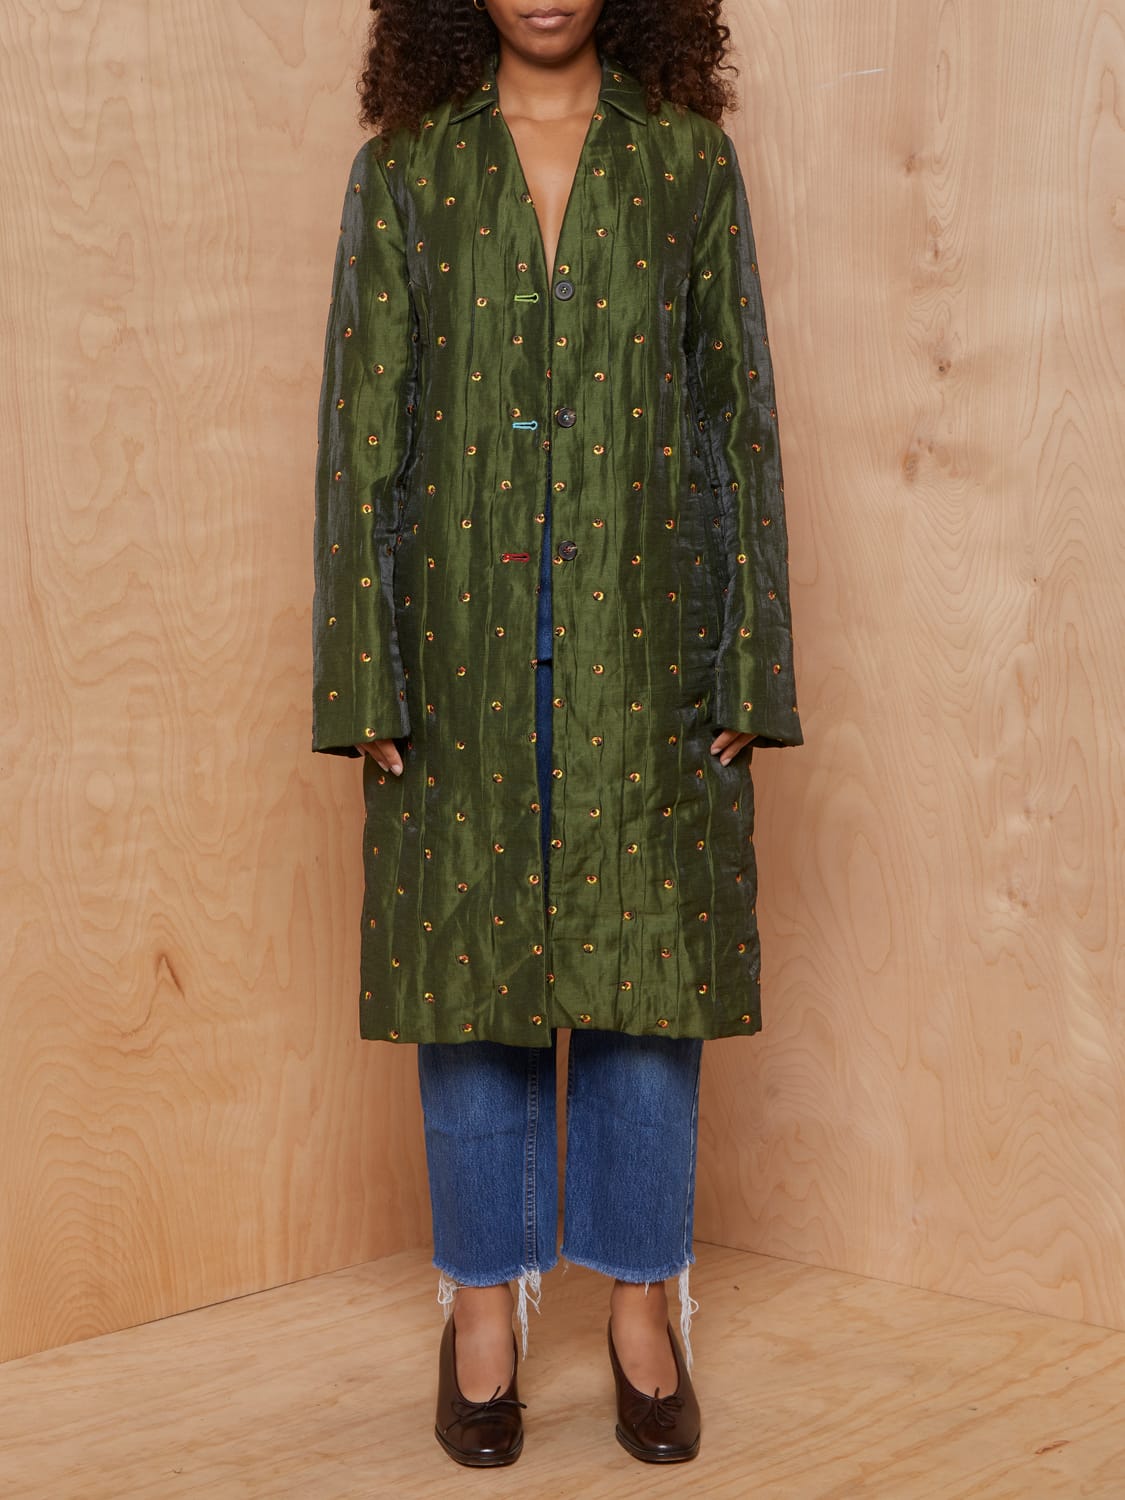 Vintage Irridescent Green Coat with Autumnal Embroidery